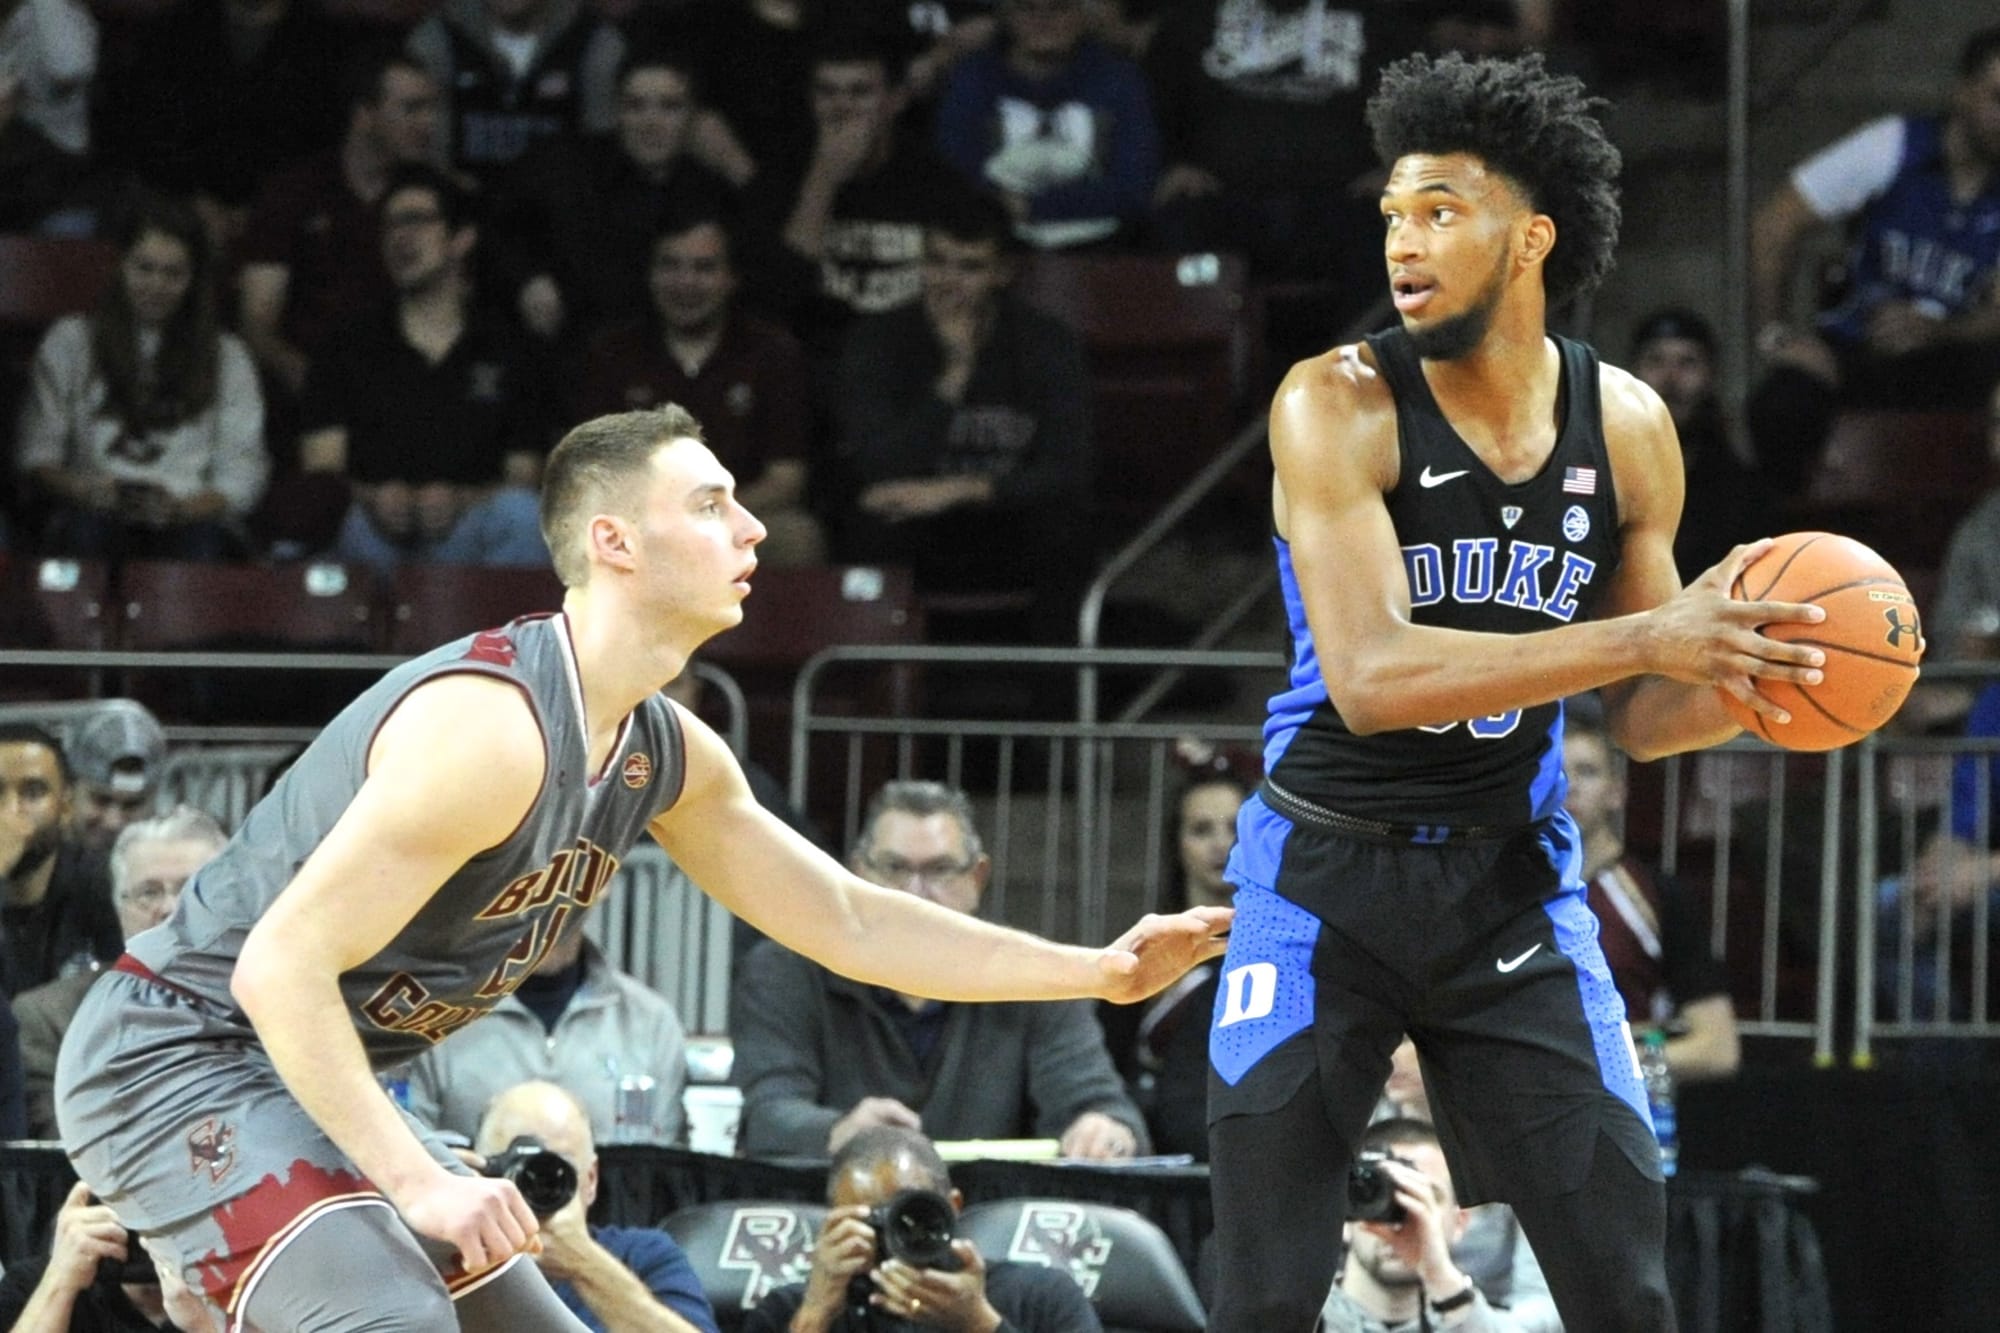 Marvin Bagley III could be the future of basketball. So why can't